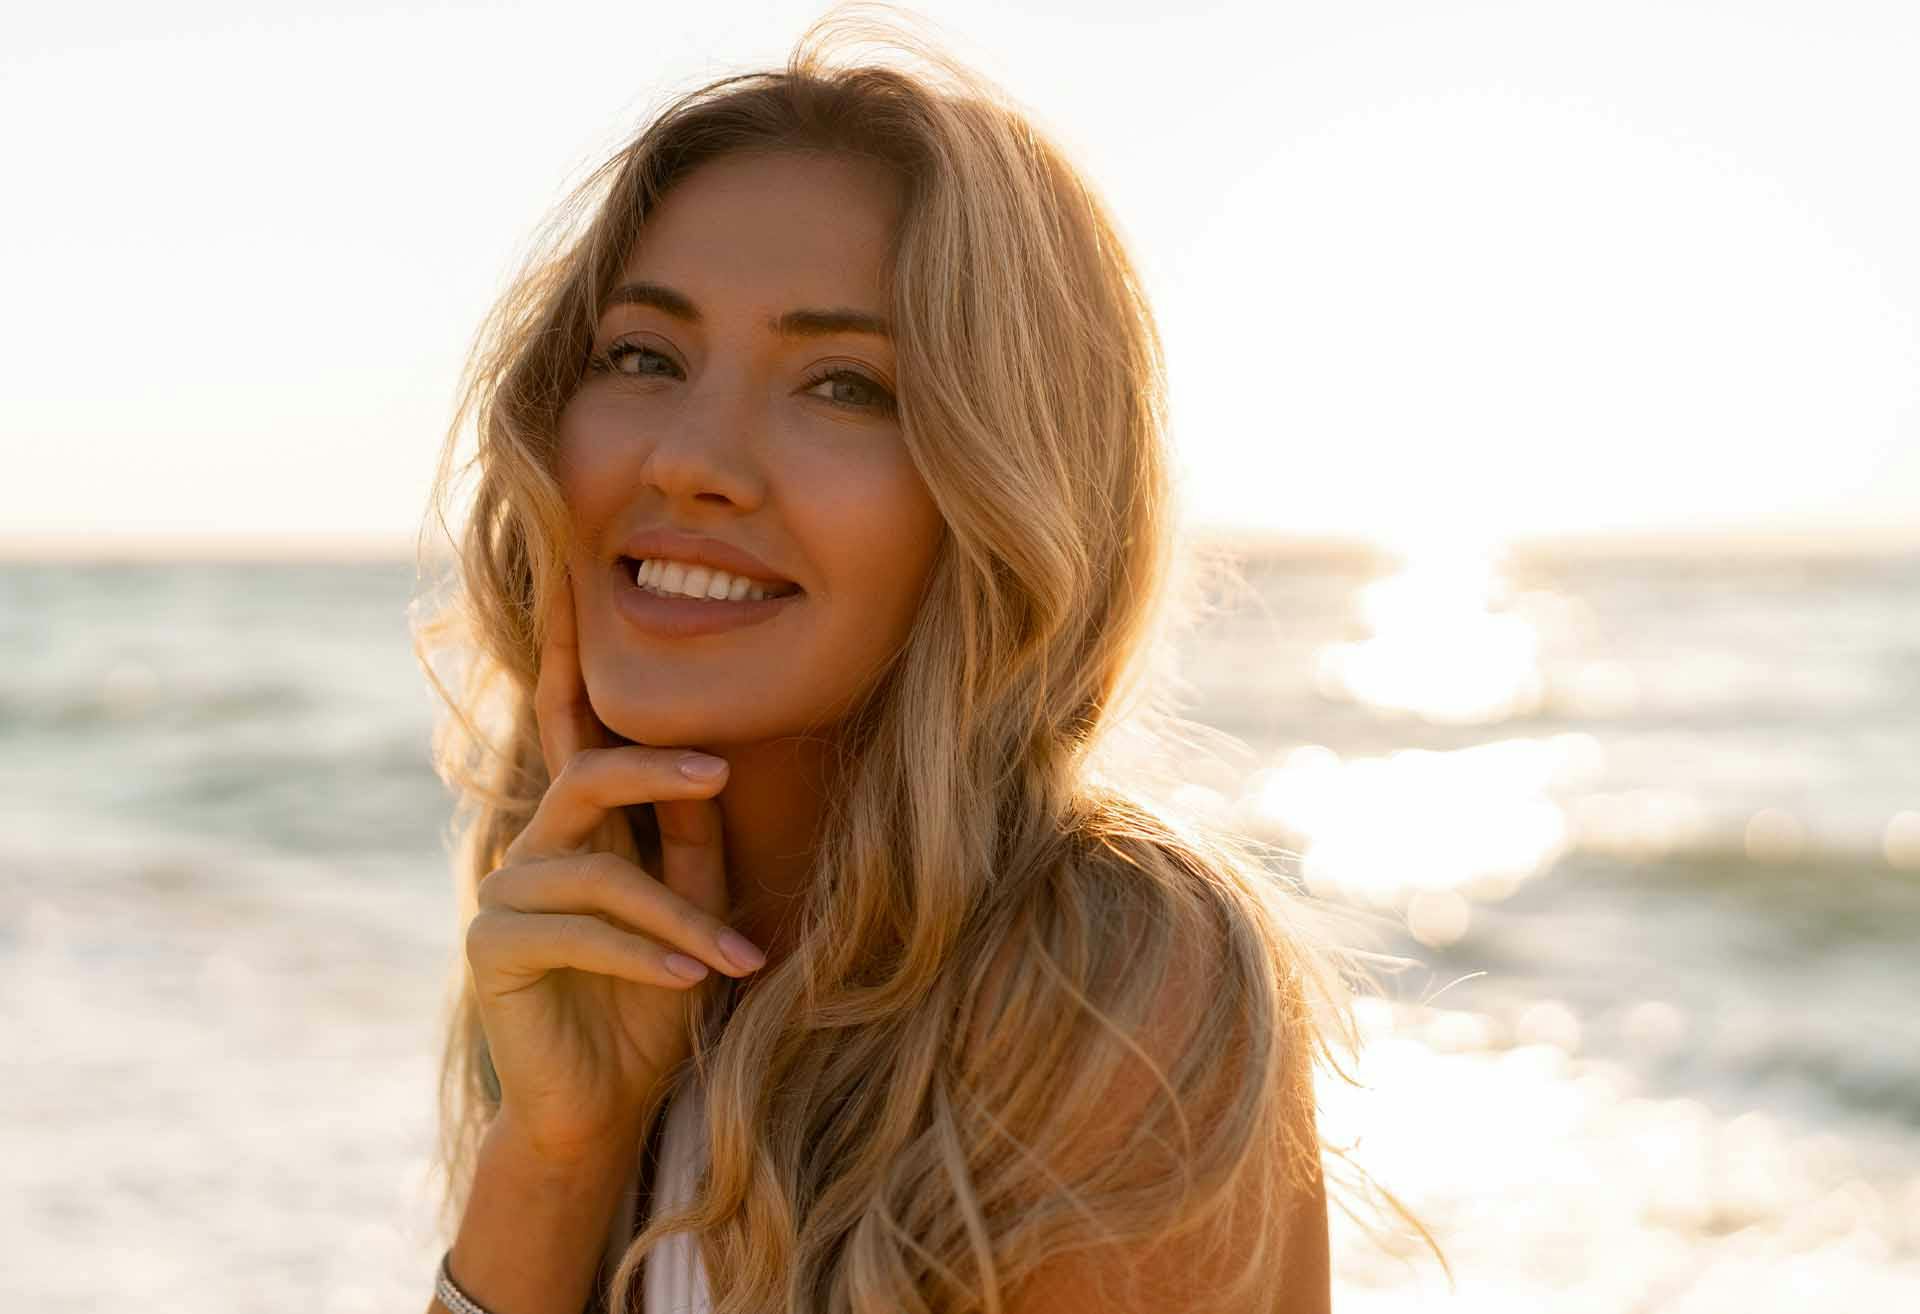 Woman with wavy blond hair smiling at the beach